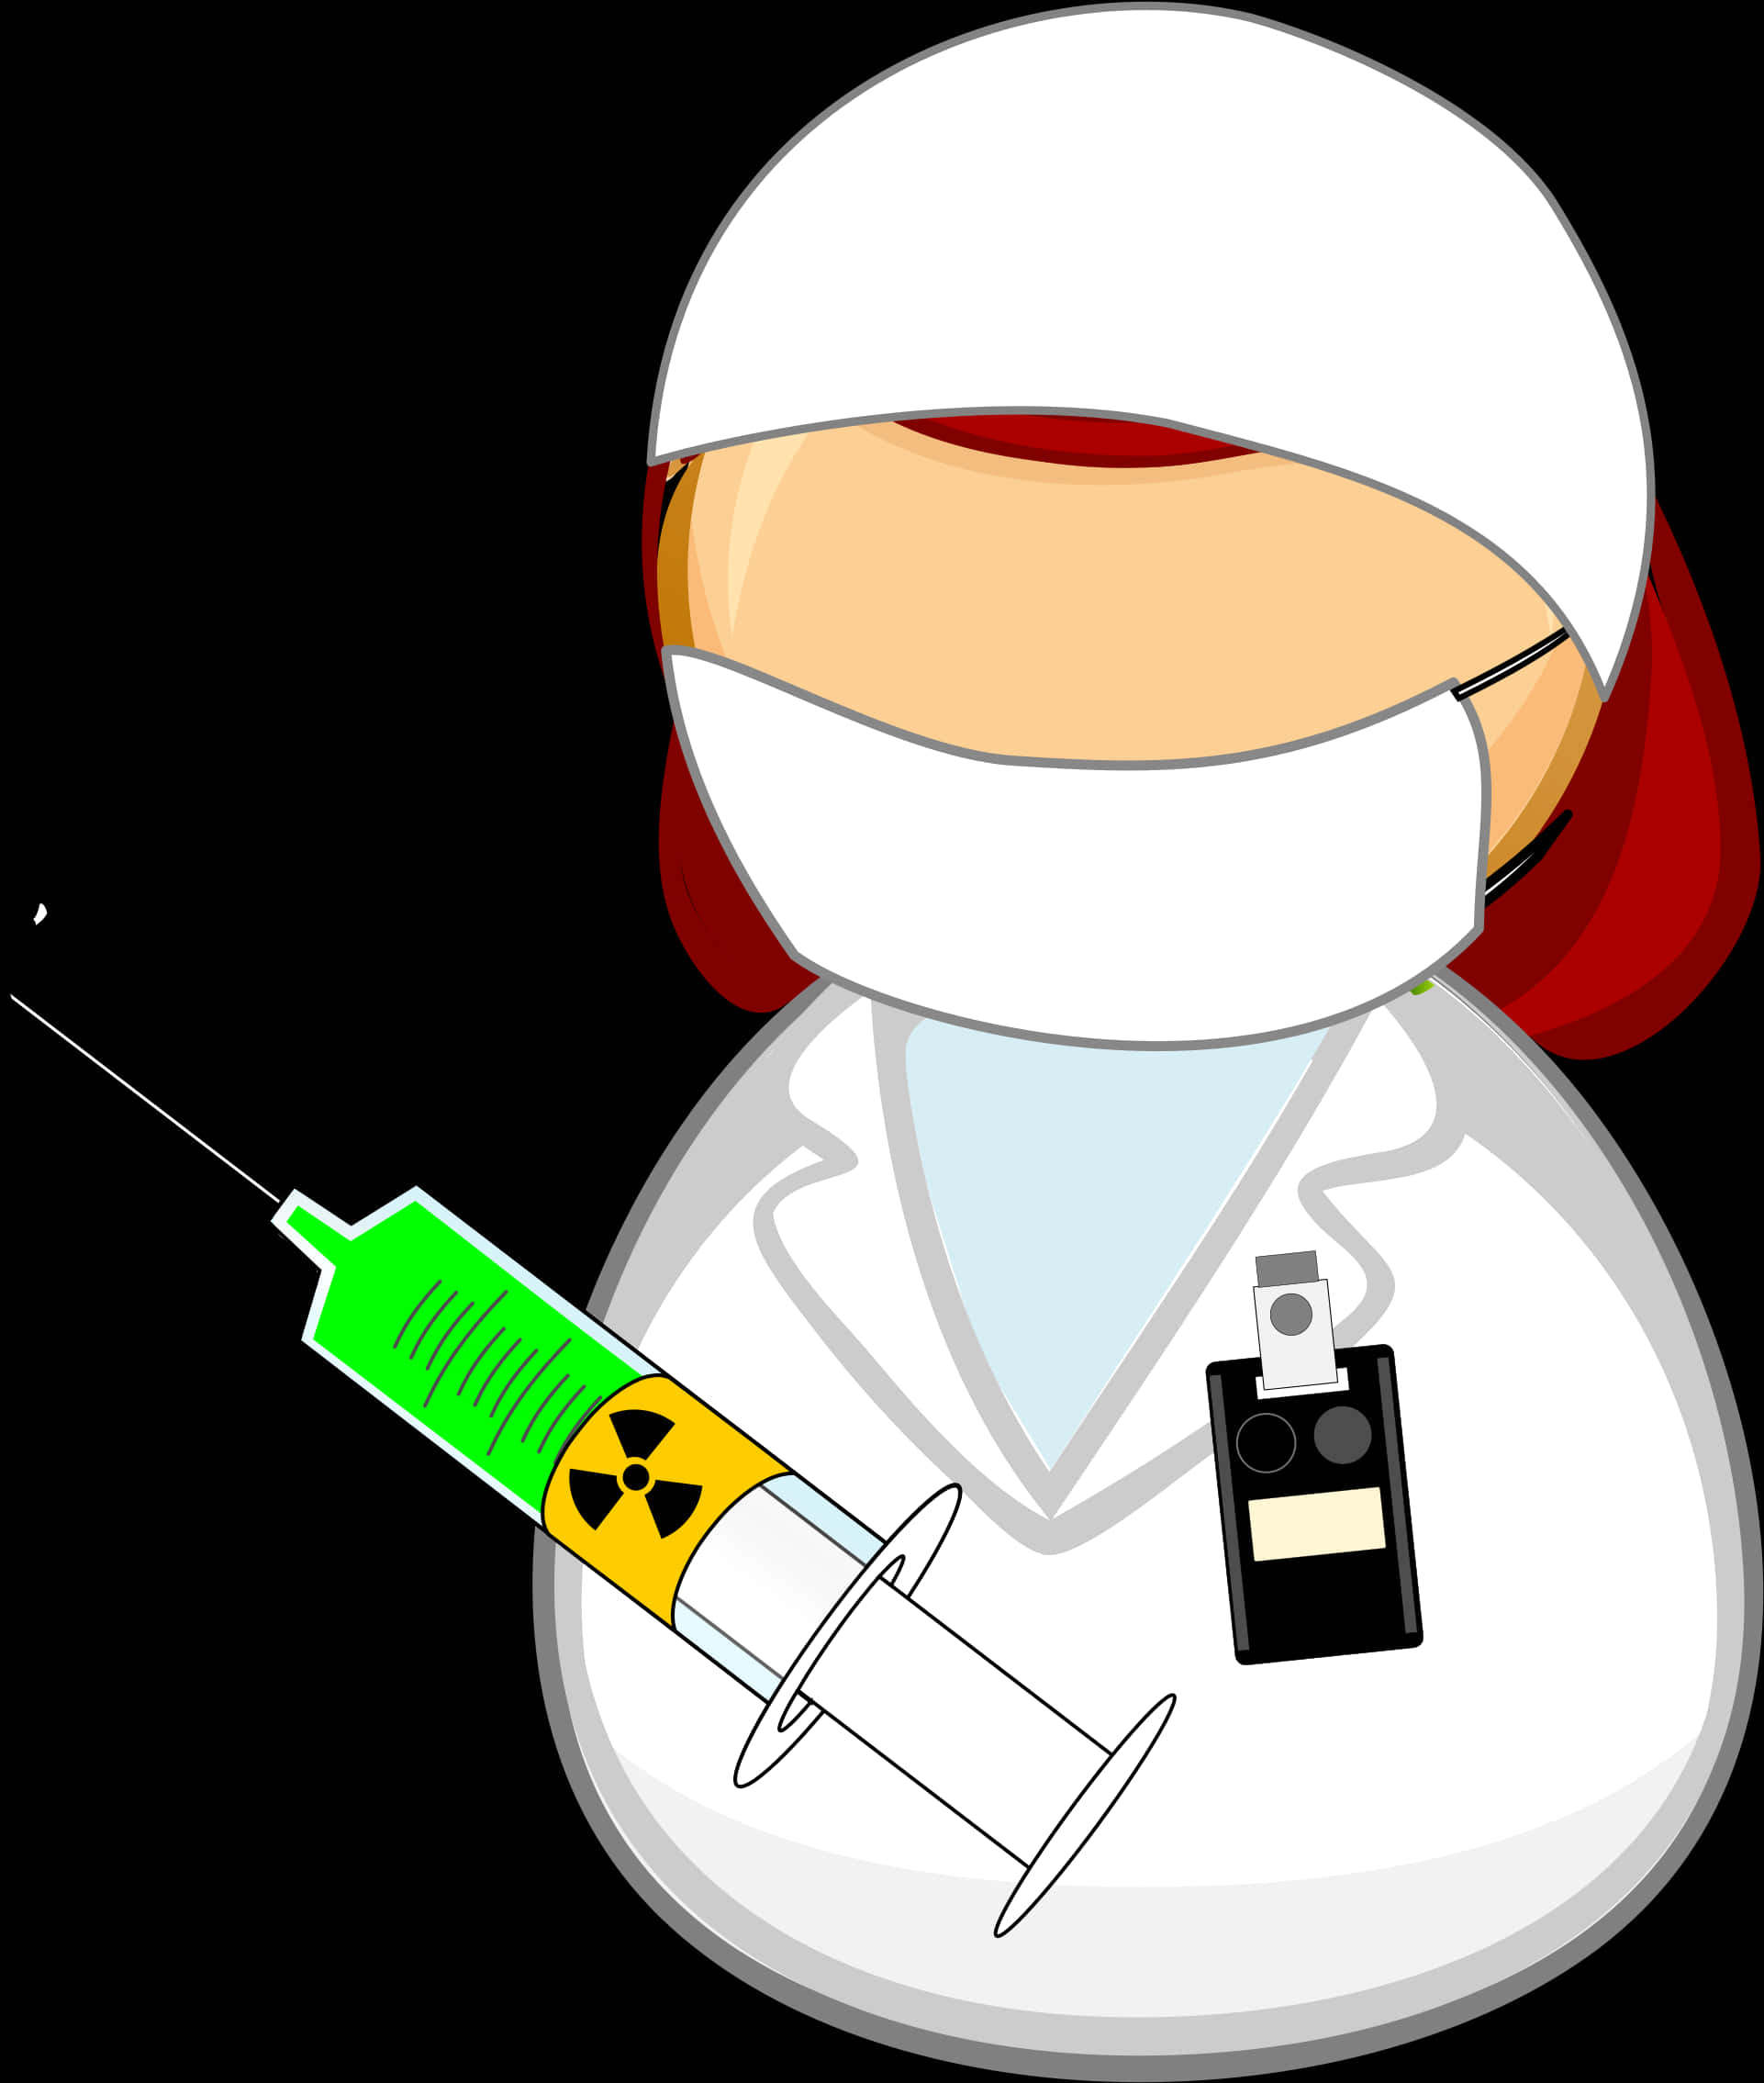 Medical Professional Cartoonwith Syringeand Vial PNG image